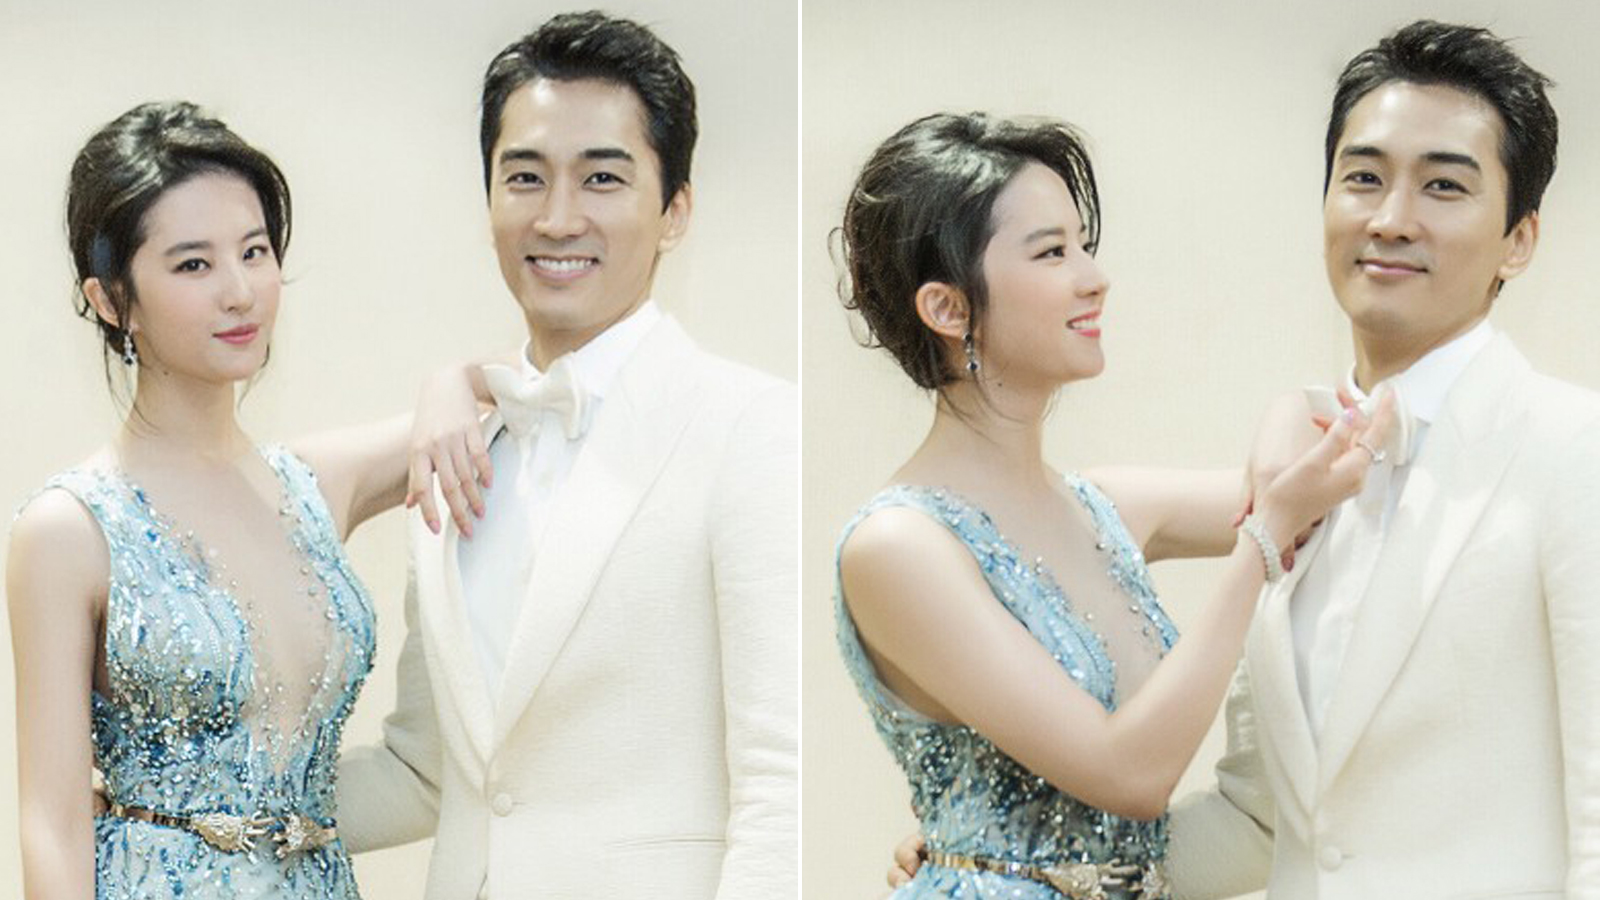 Song Seung Heon wants a flash marriage - 8days